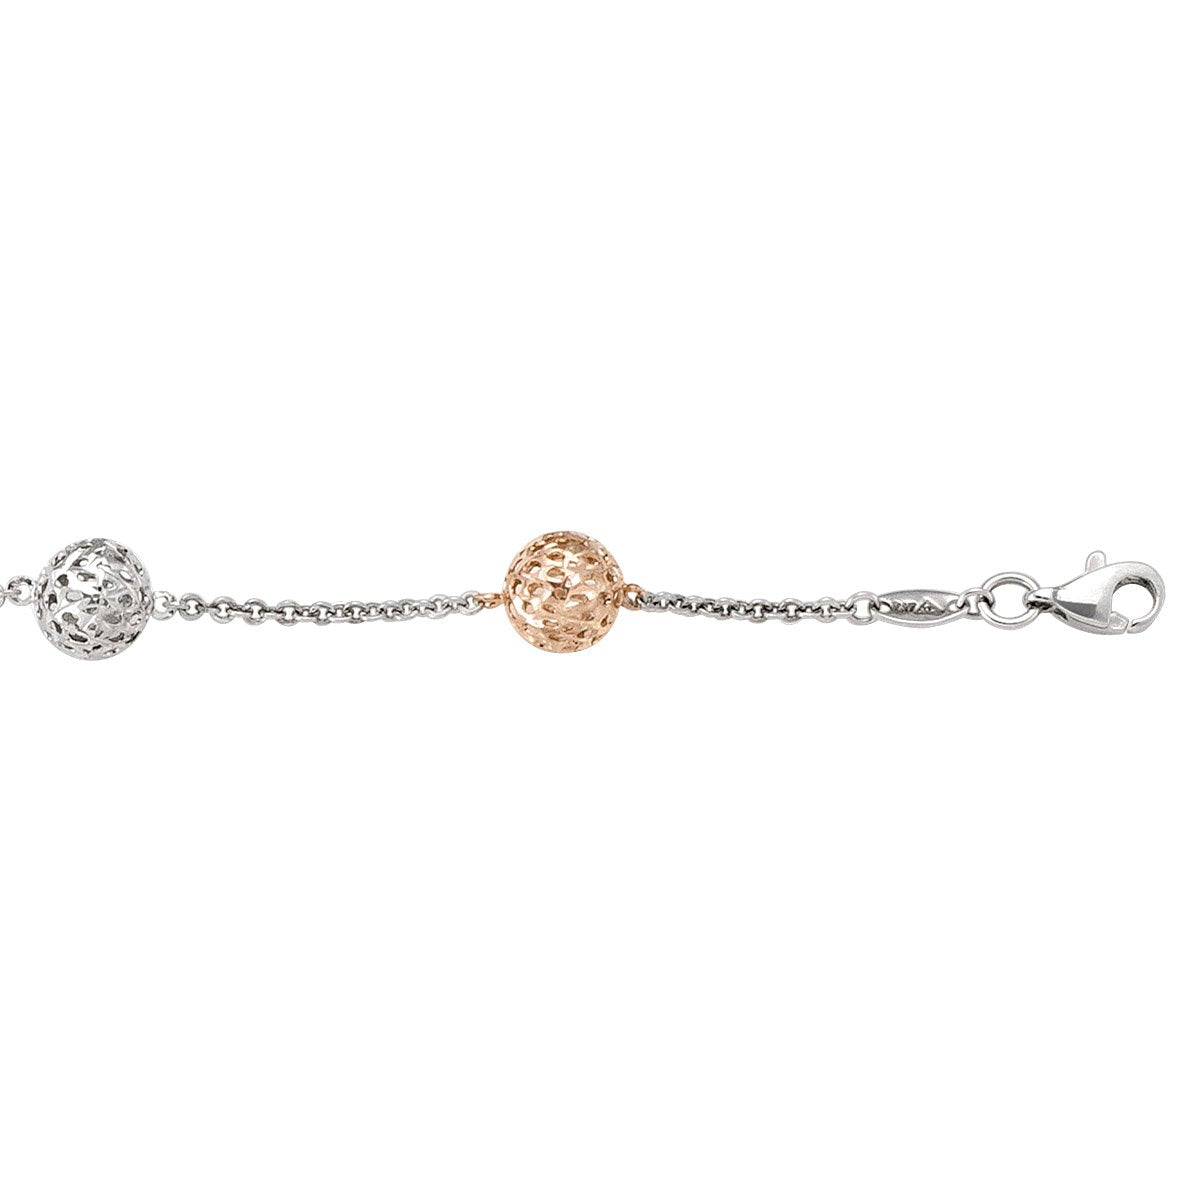 LADIES BRACELETS PINK AND WHITE GOLD FANCY BALL LINK CHAIN